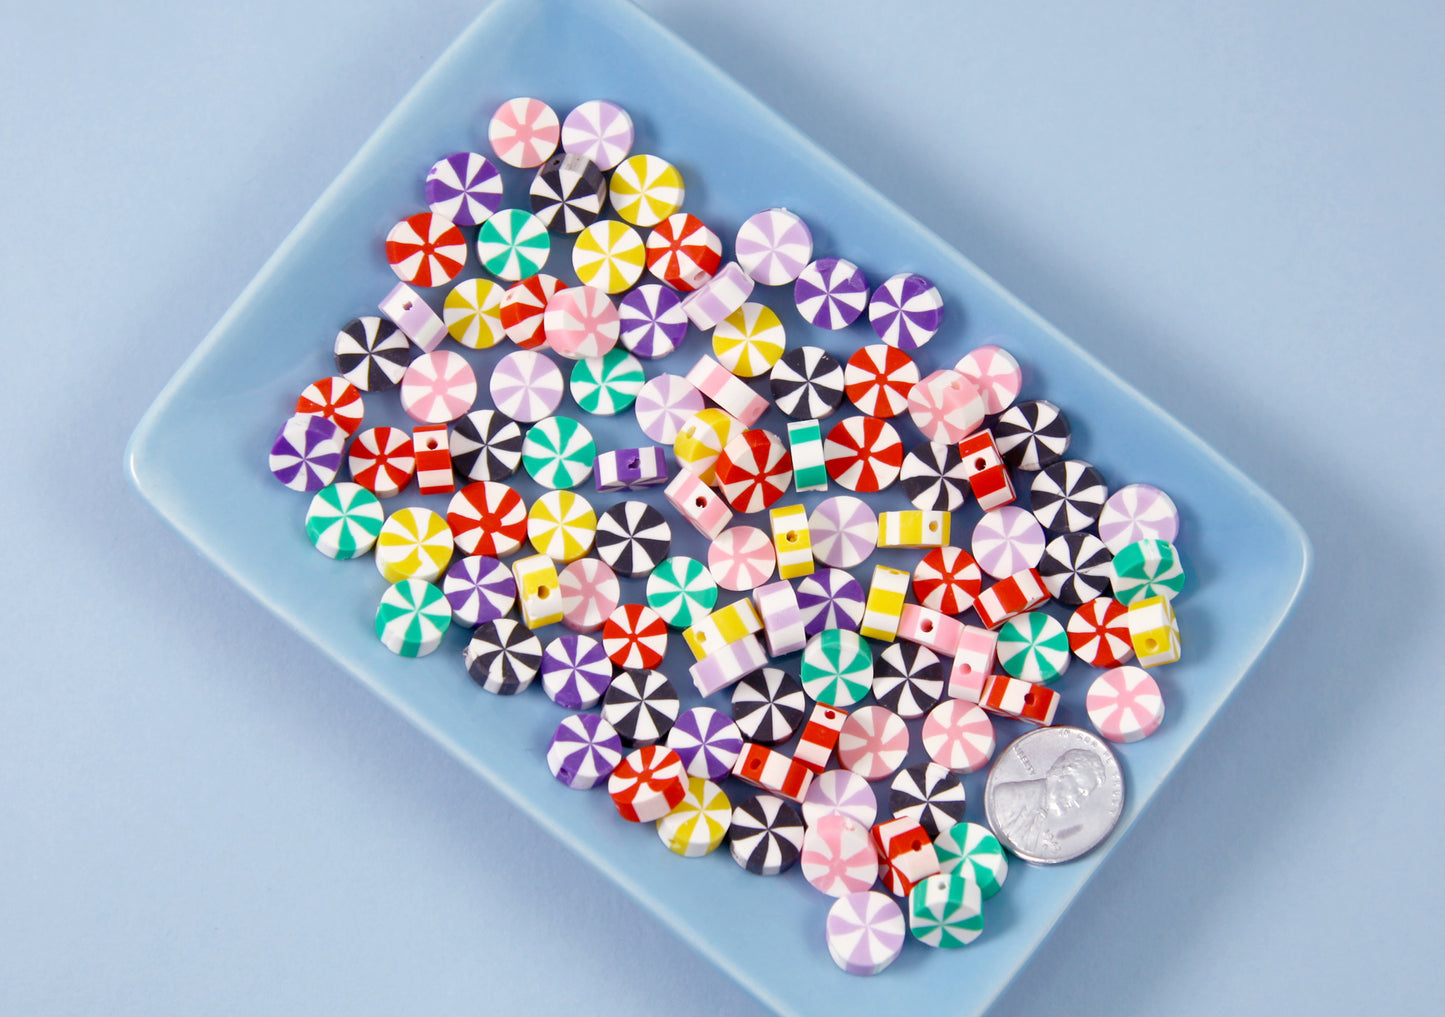 Candy Beads - 10mm Little Peppermint Striped Beads Fimo Polymer Clay Candy Shape Beads - 100 pc set